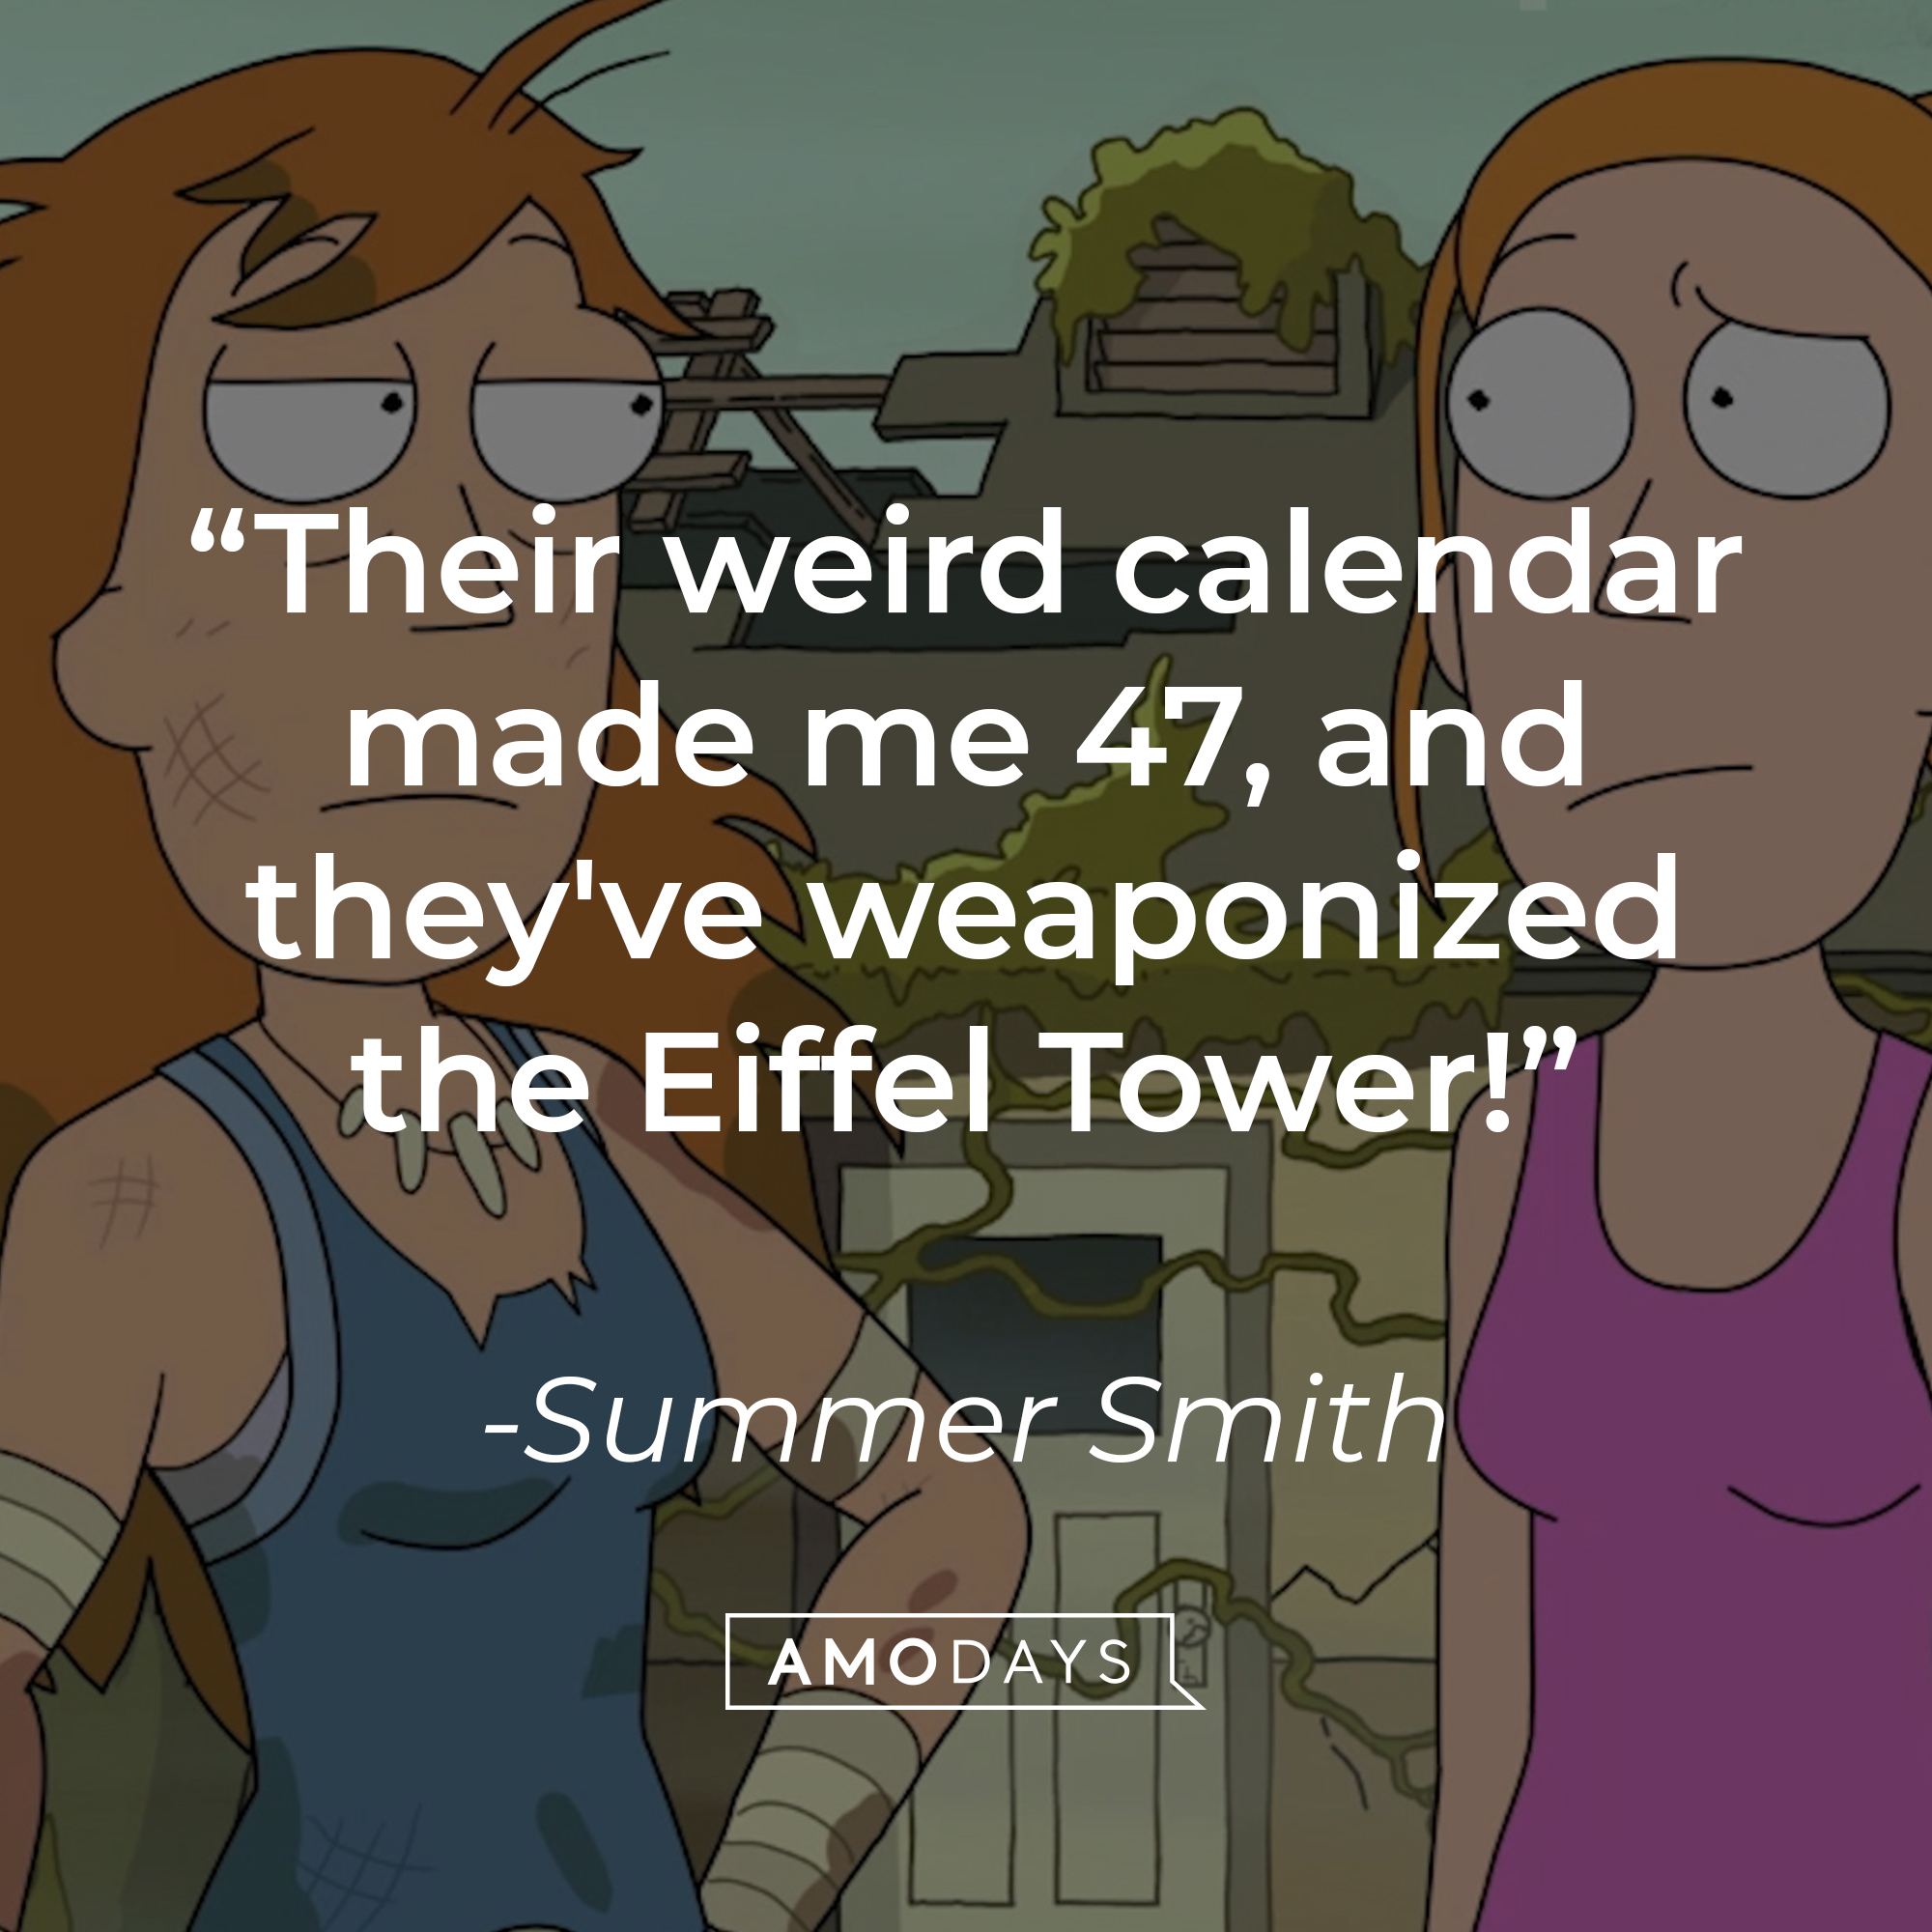 An image of two Summer Smith’s, with her quote: "Their weird calendar made me 47, and they've weaponized the Eiffel Tower!" | Source: Facebook.com/RickandMorty